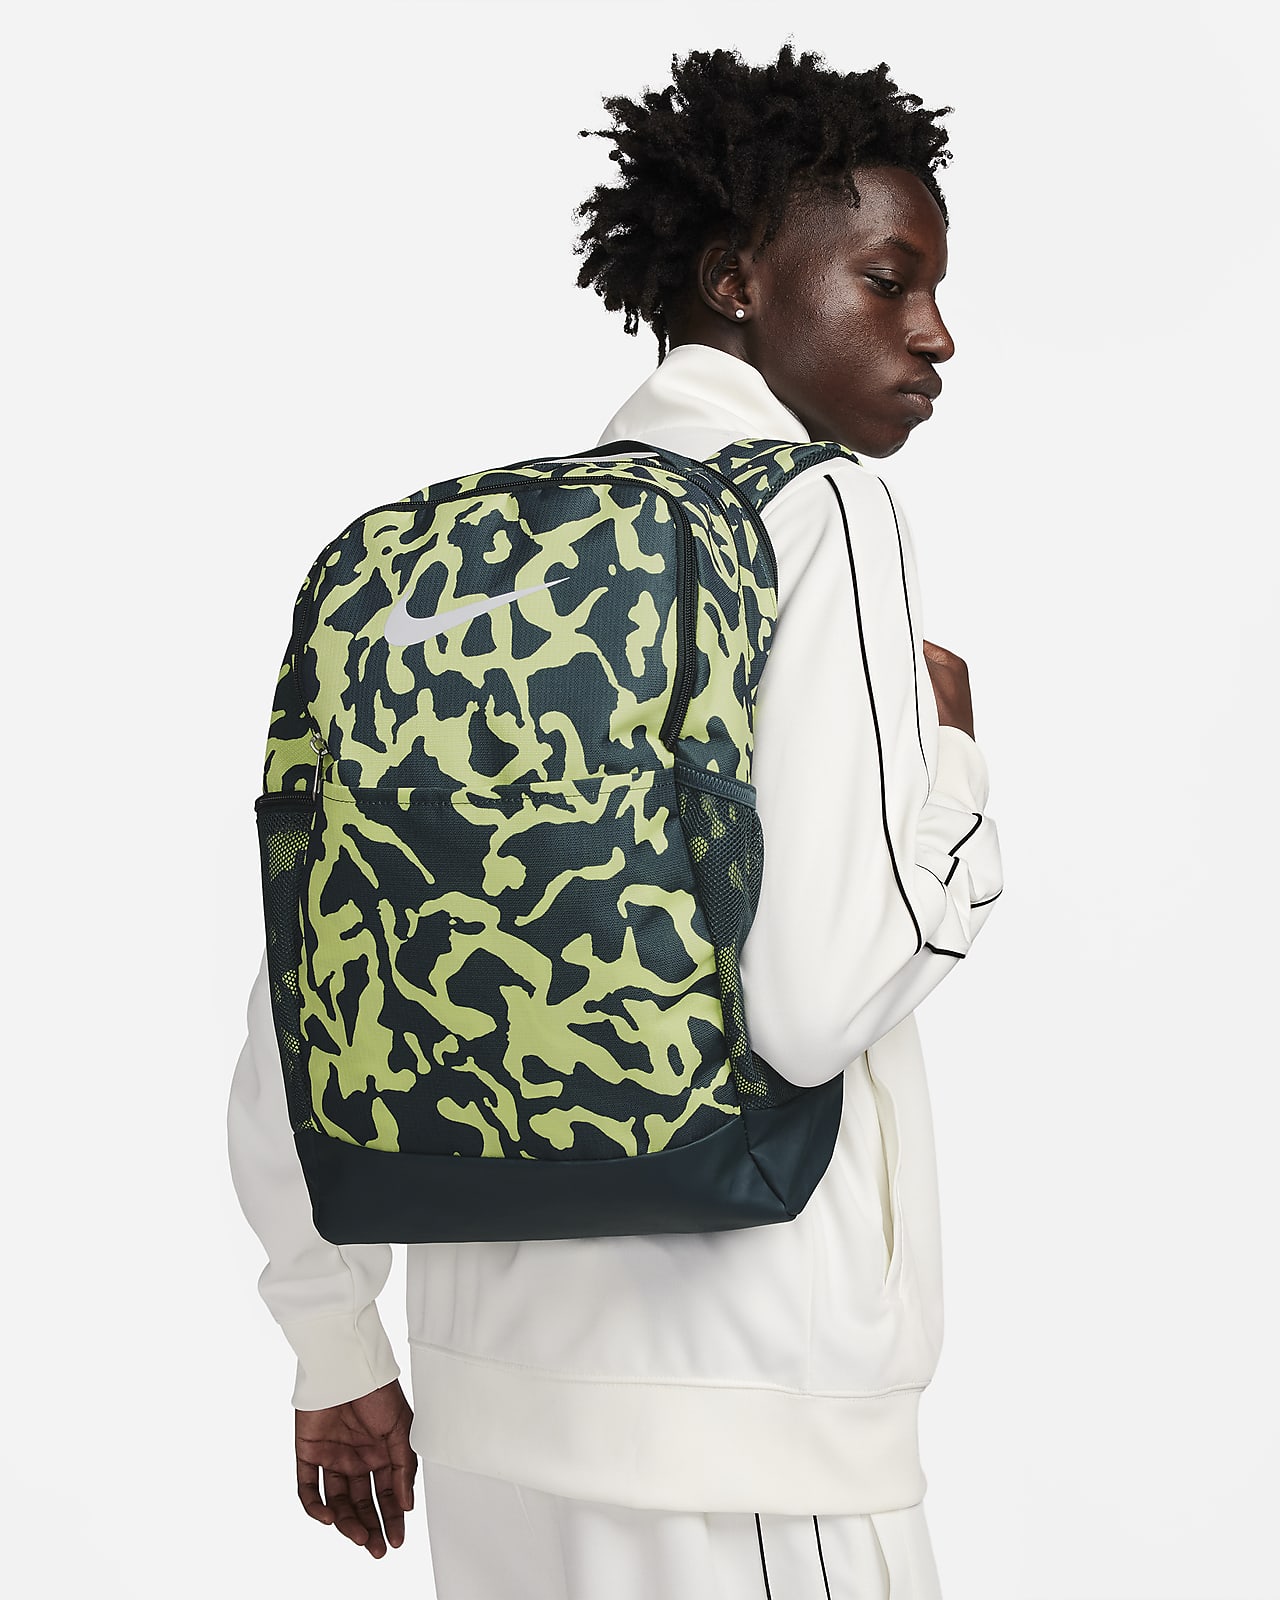 https://static.nike.com/a/images/t_PDP_1280_v1/f_auto,q_auto:eco/2ad345f9-86bc-4c90-9d01-f8a99a927d40/brasilia-backpack-cVBZss.png